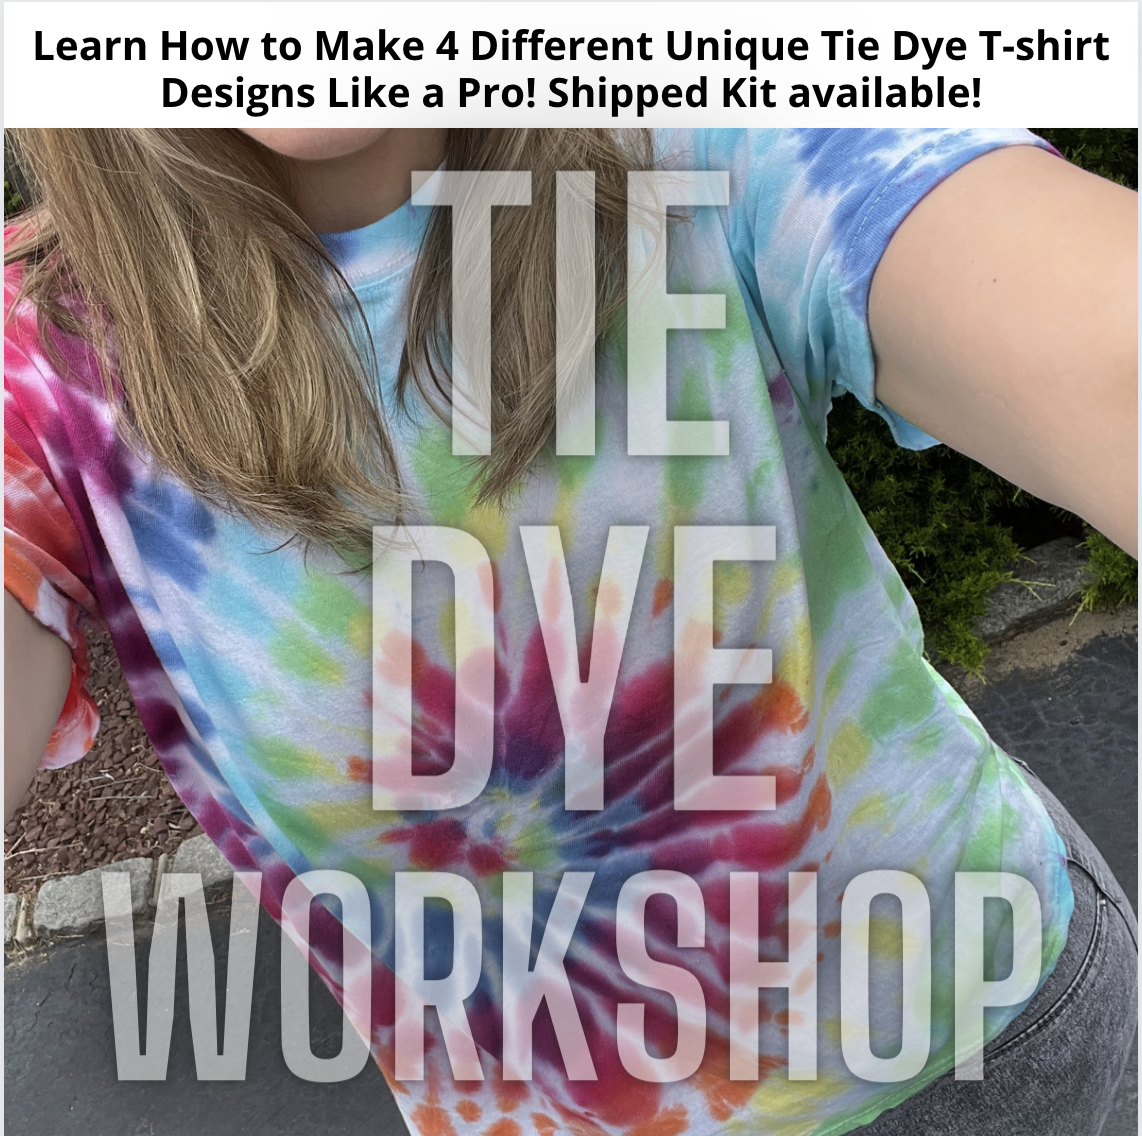 A Virtual Tie Dye TShirt Workshop Kits available for shipping  experience project by Yaymaker